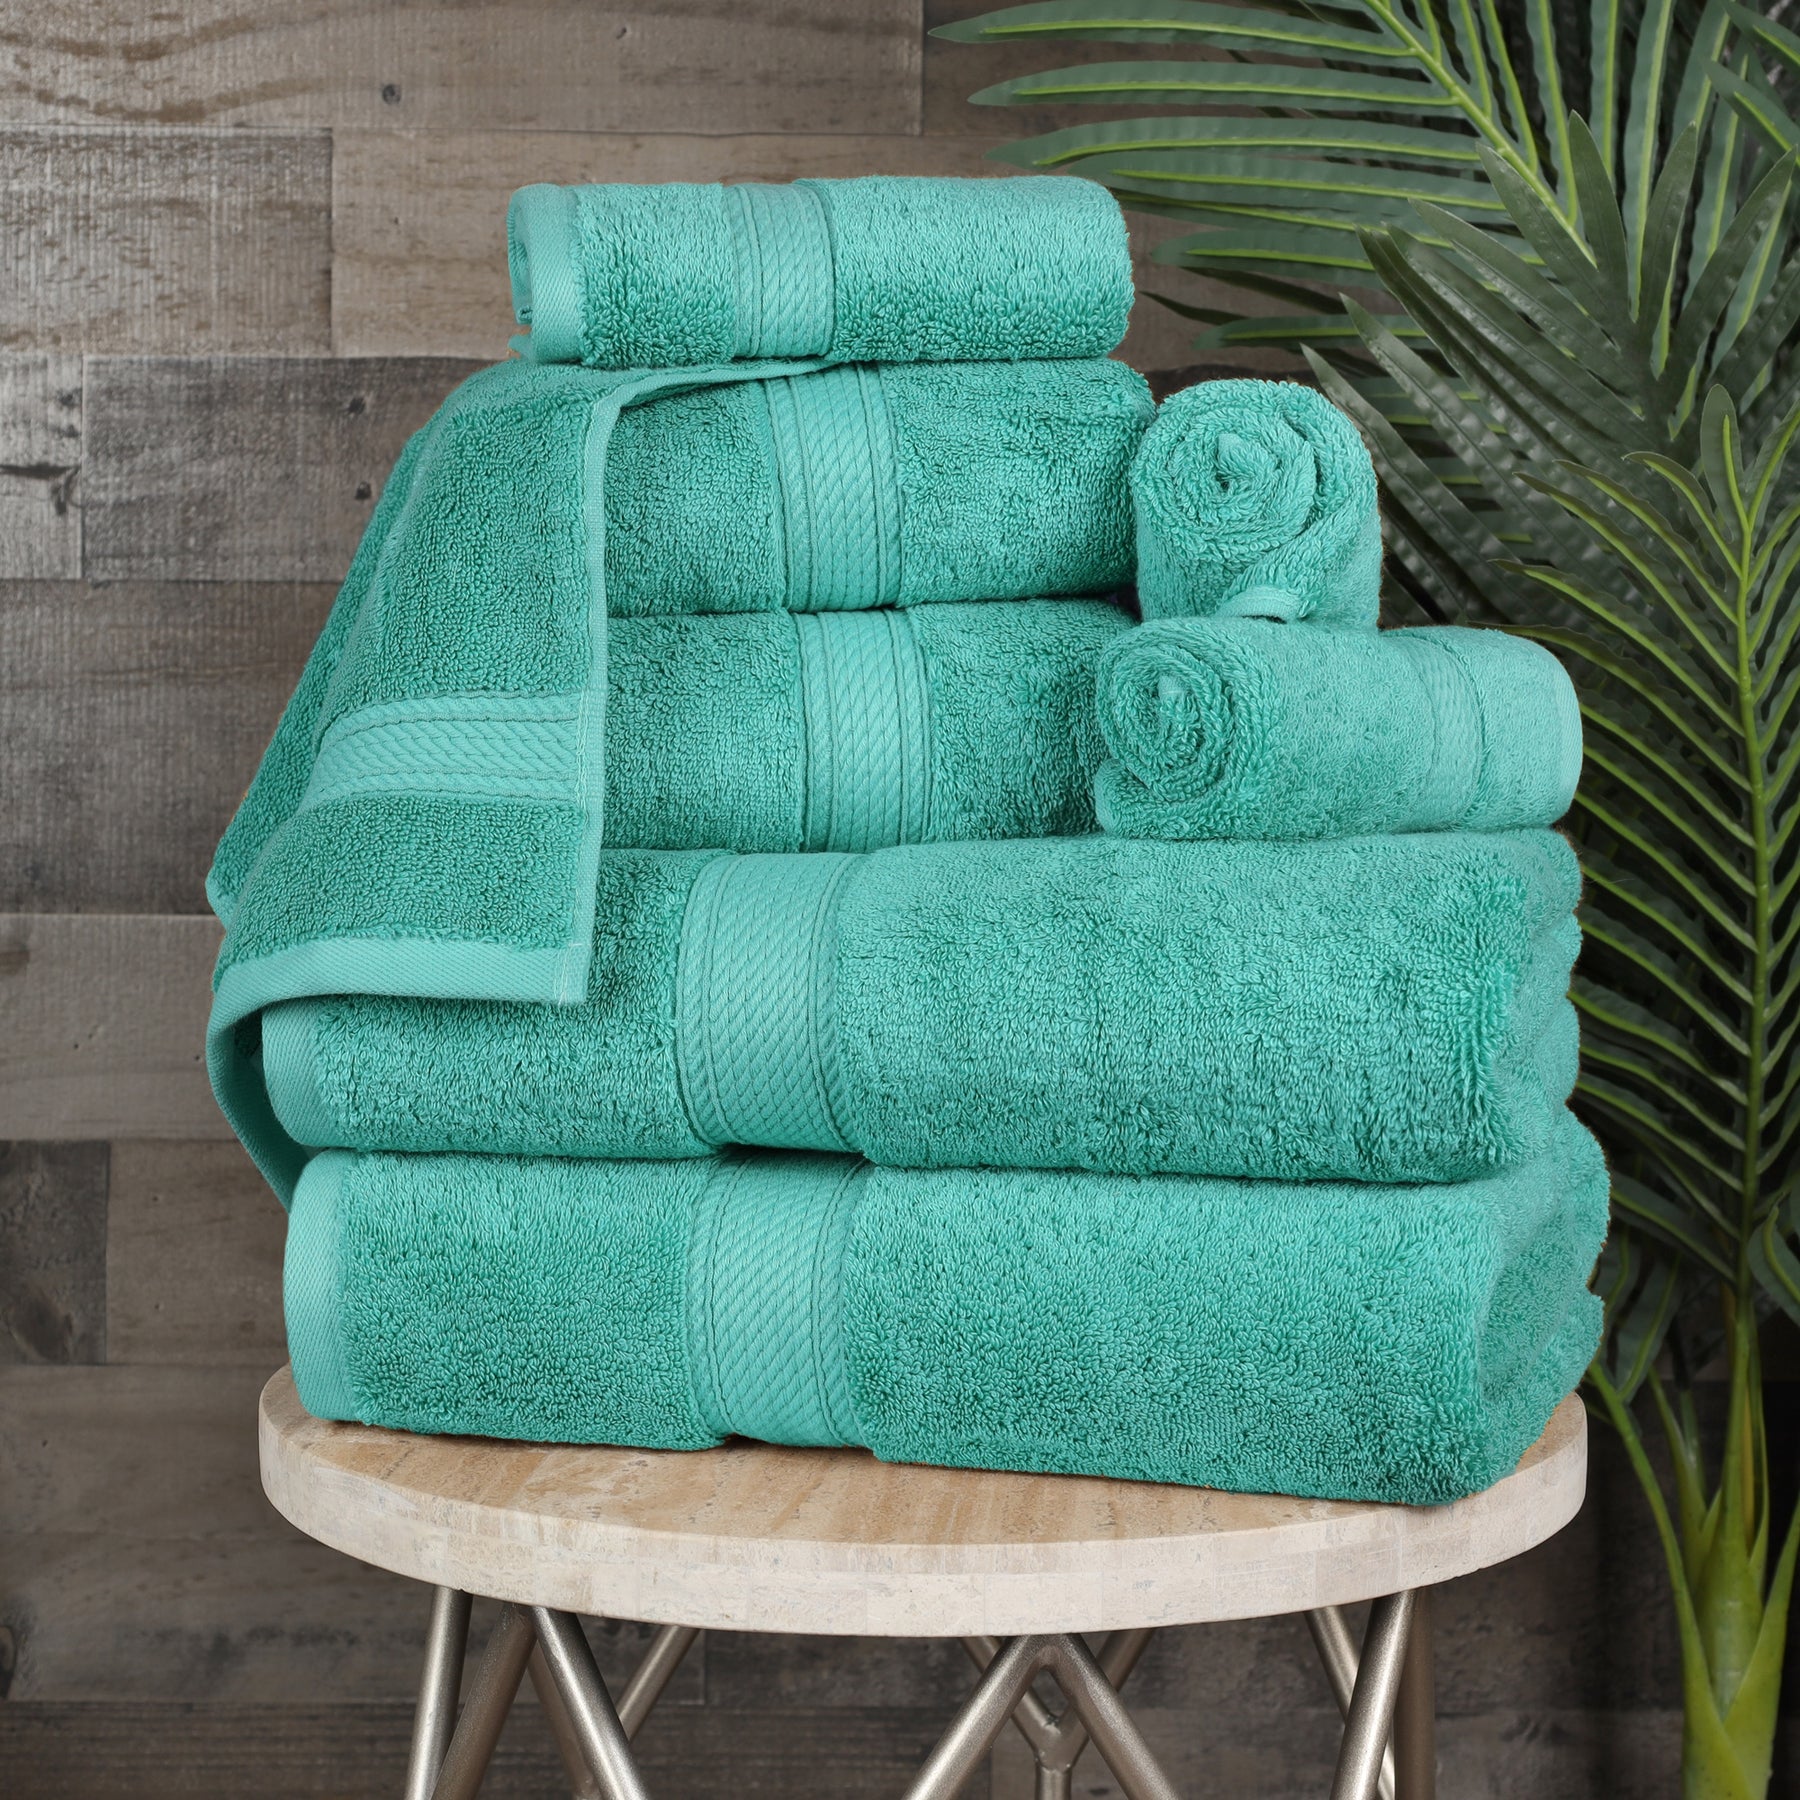 Green Essen 8 Pack Extra Large Bath Towel35x 70 Highly Absorbent